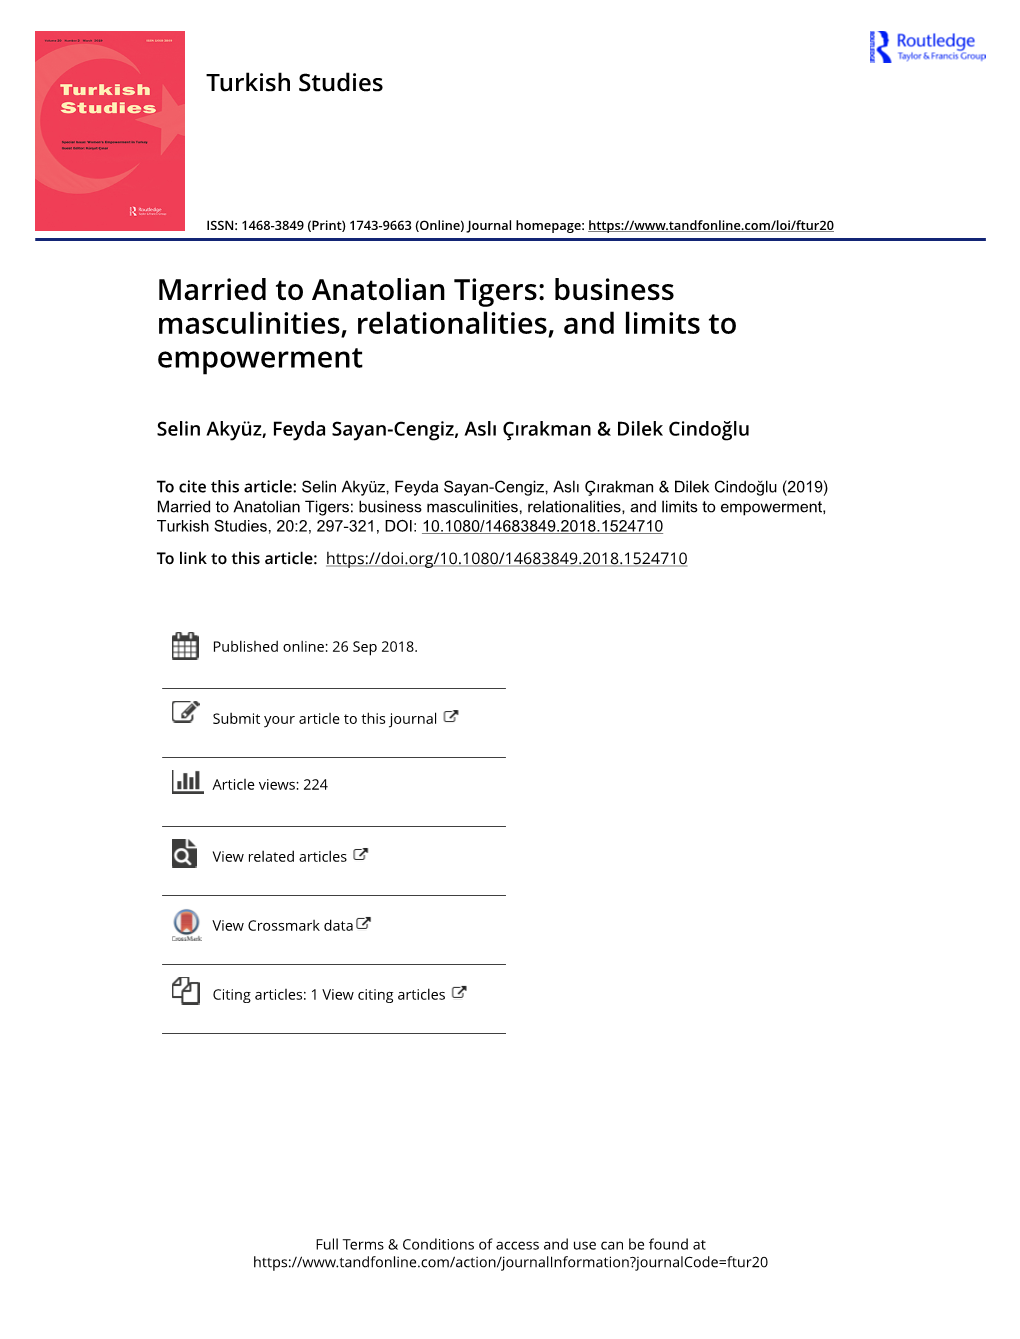 Married to Anatolian Tigers: Business Masculinities, Relationalities, and Limits to Empowerment